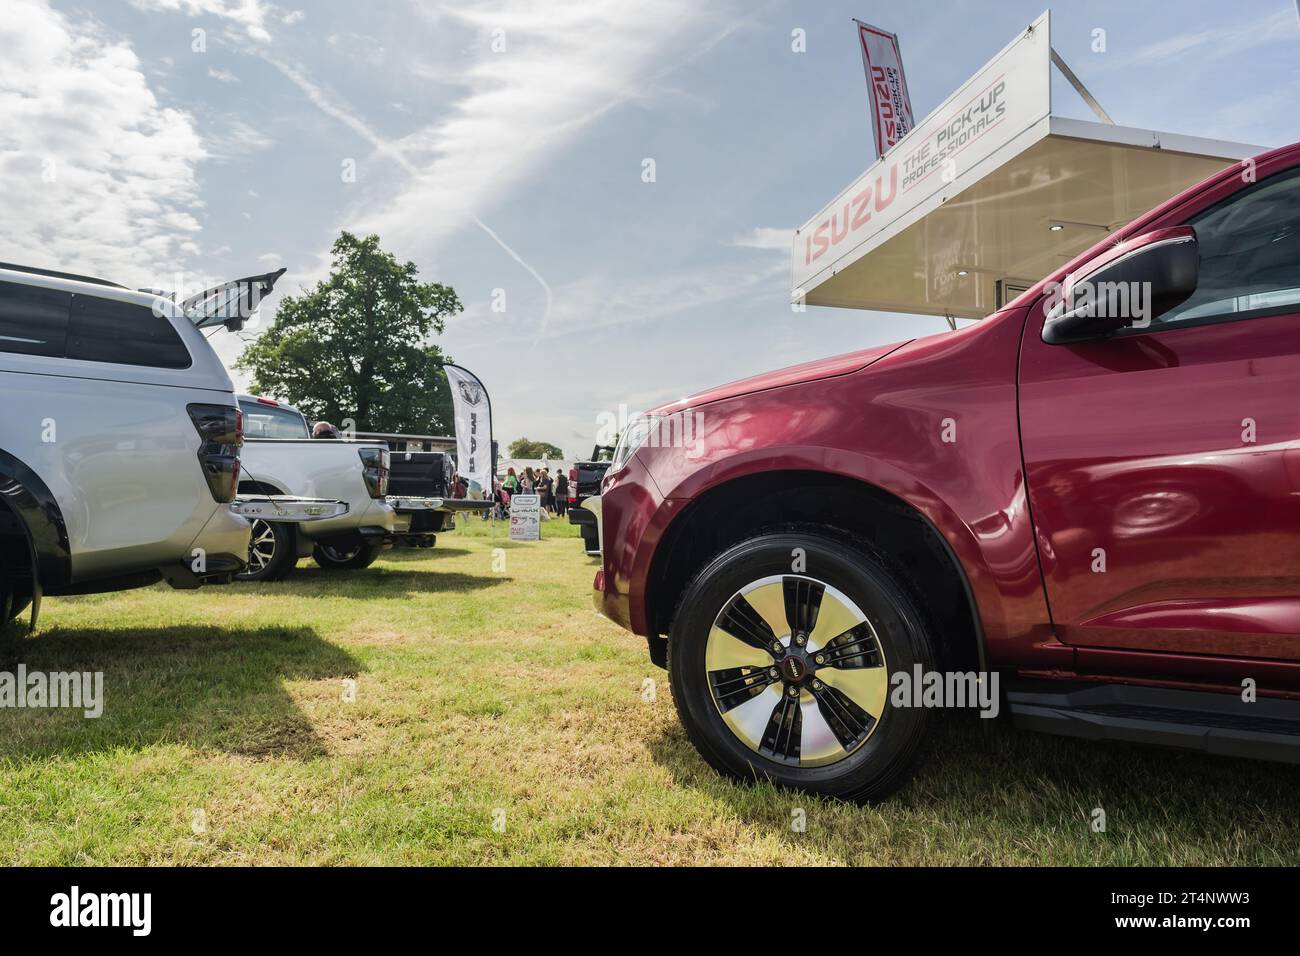 Nantwich, Cheshire, England, July 26th 2023. View of a red Isuzu D-Max alloy wheel with a trade show stand in the background. Stock Photo